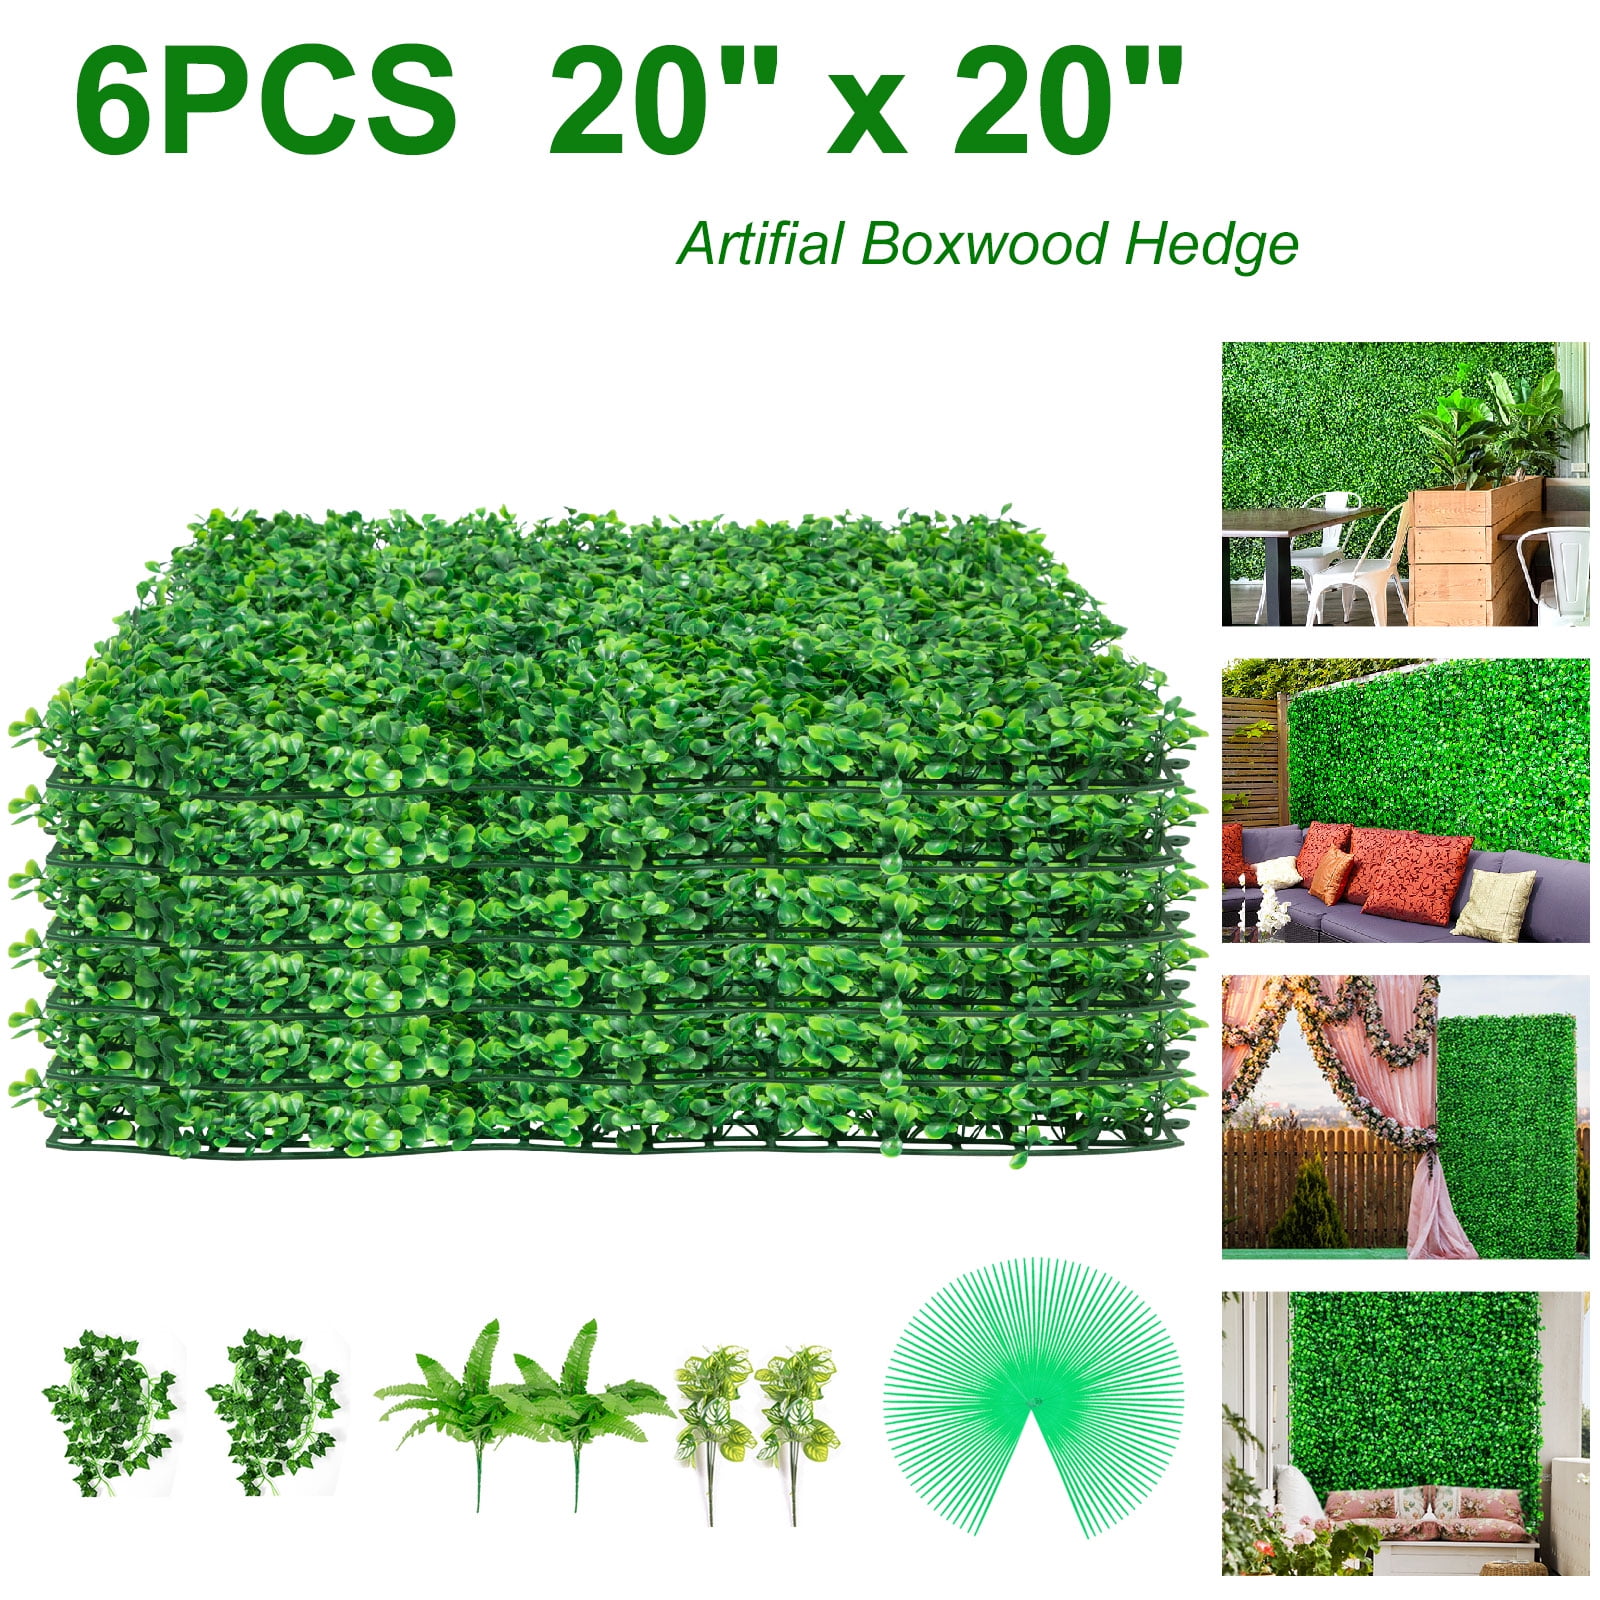 12x Artificial Boxwood Mat Wall Hedge Decor Privacy Fence Panel Grass 20"x20" 